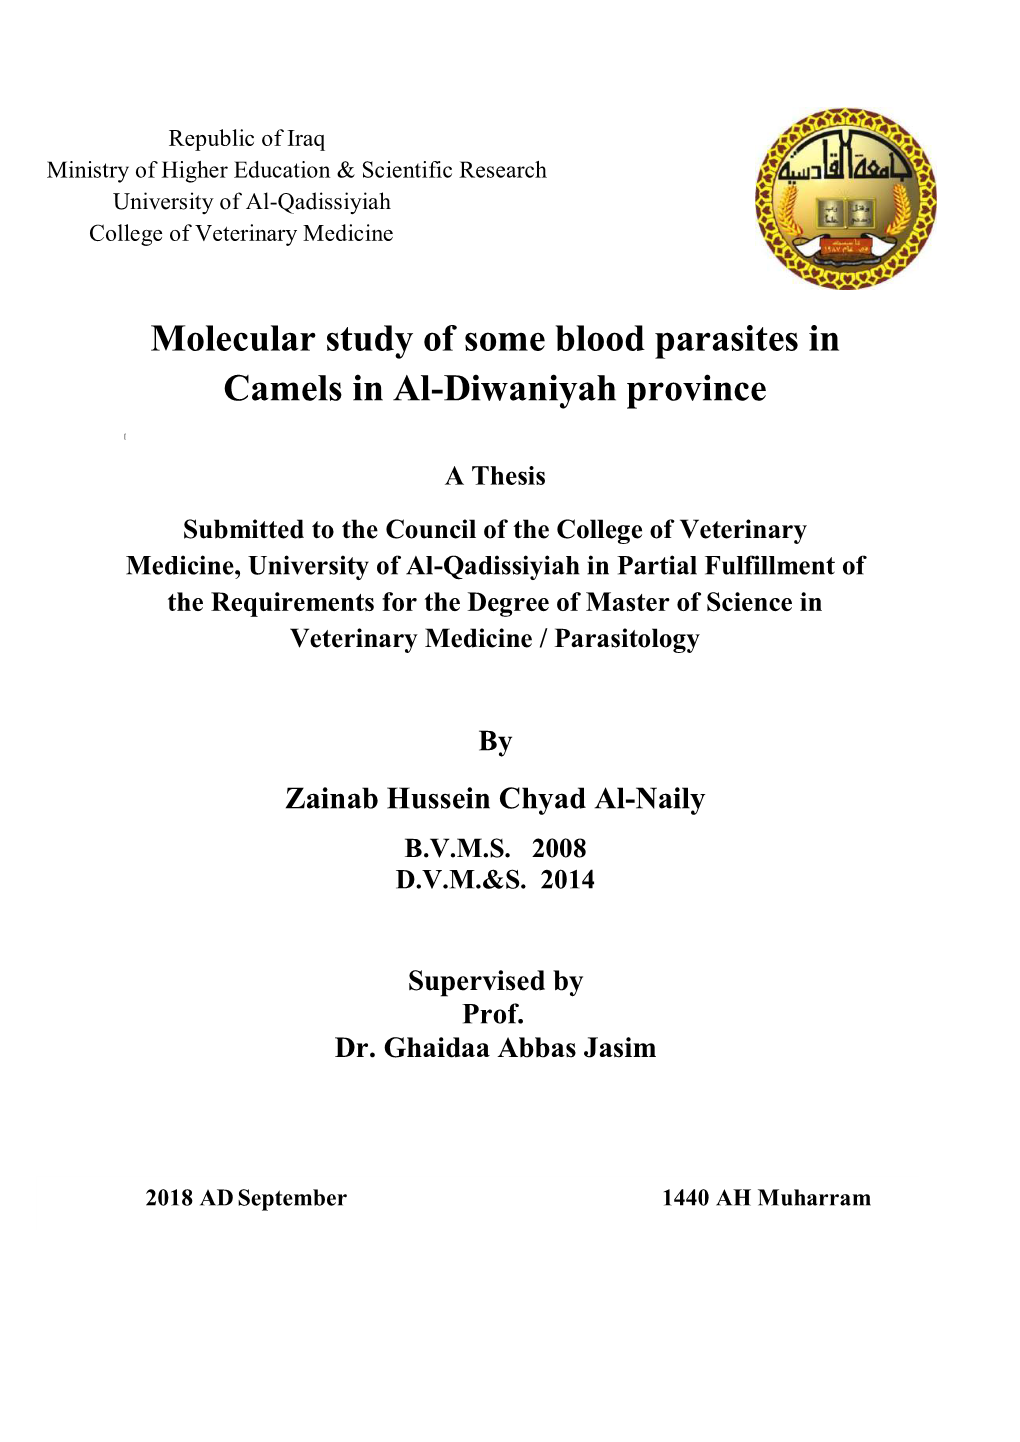 Molecular Study of Some Blood Parasites in Camels in Al-Diwaniyah Province